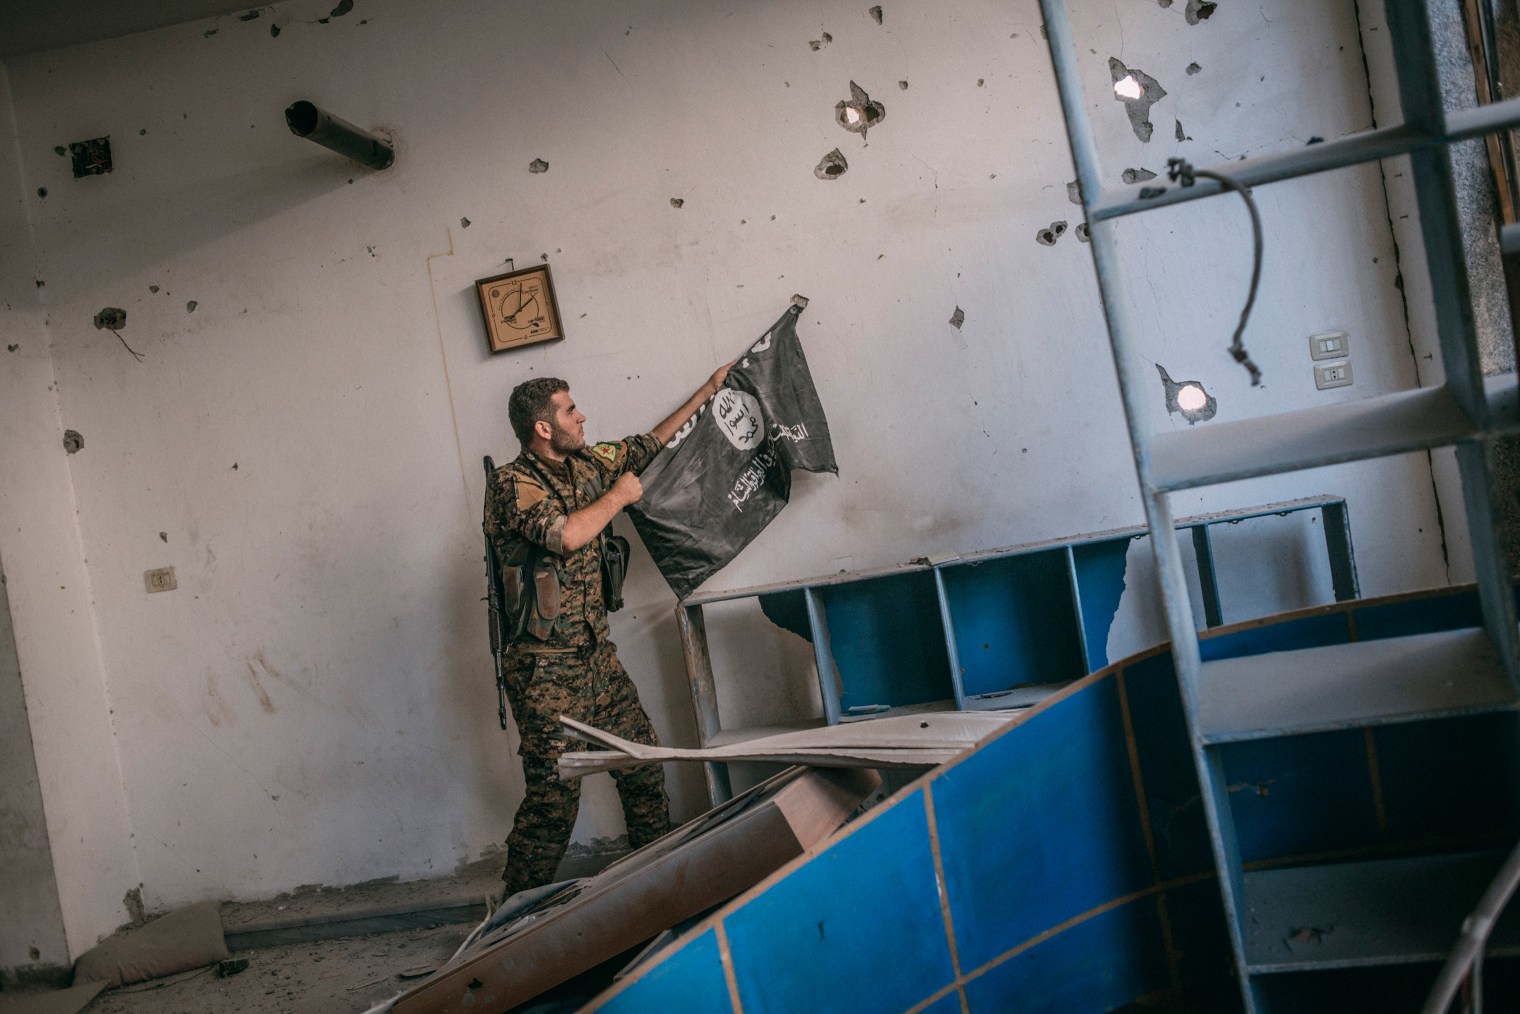 A member of the Syrian Democratic Forces removes an Islamic State flag from a wall in Raqqa on Oct. 18, 2017.